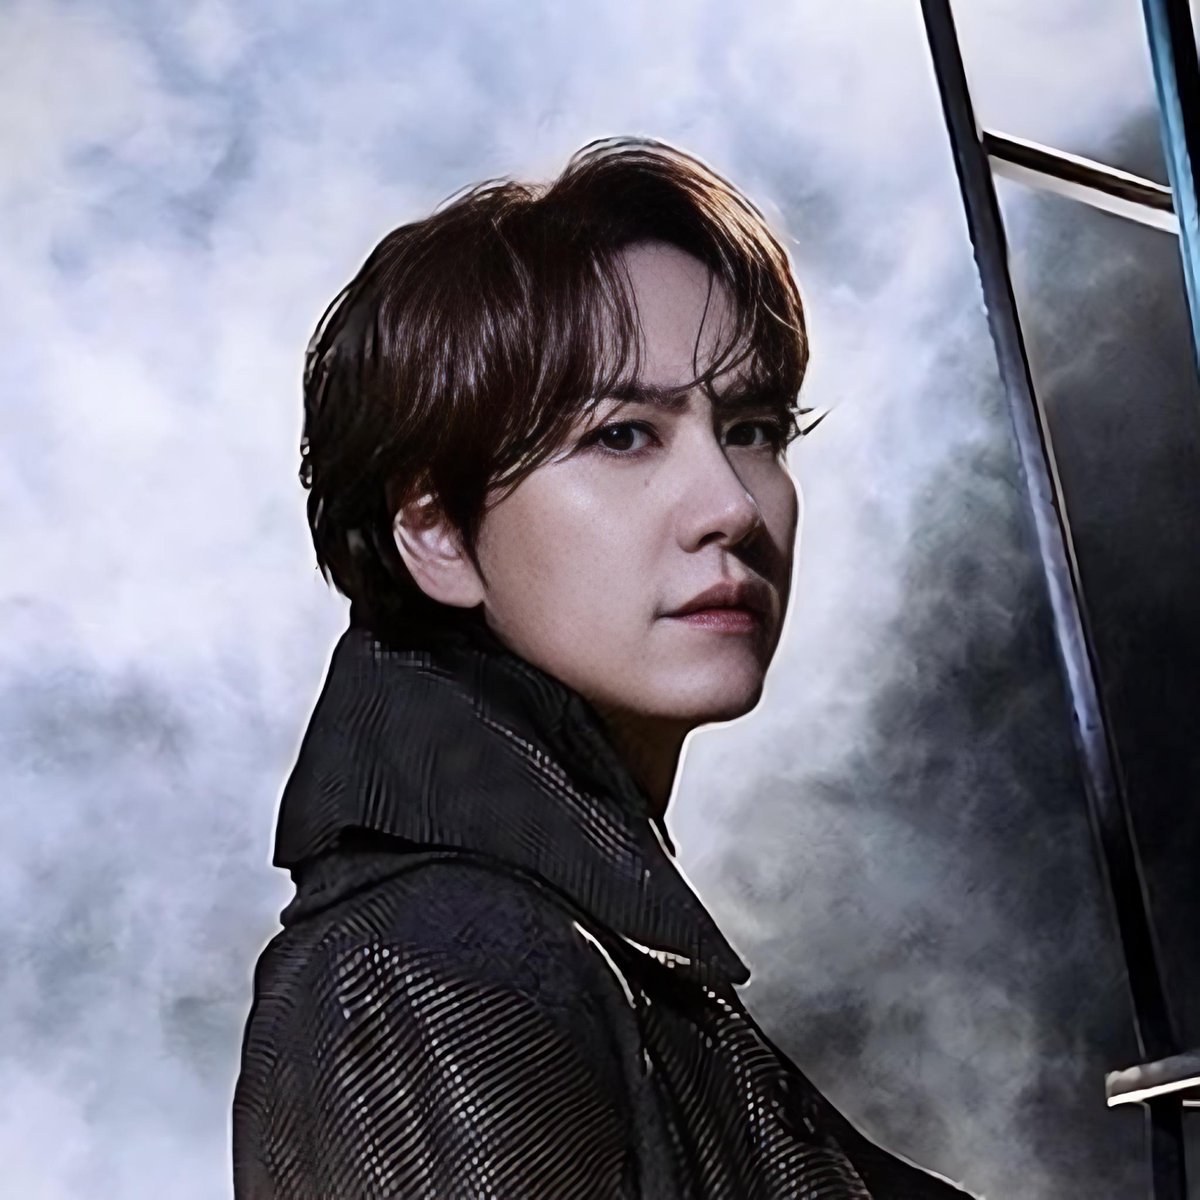 “Frankenstein will be performed at Blue Square Shinhan Card Hall in Seoul from June 5 to August 25.” I should be able to catch the 2nd half of the season, in terms of school holiday🤔 Just need to sweet talk my husband🤣 How come he looks so handsome but still so puppyish? 😍